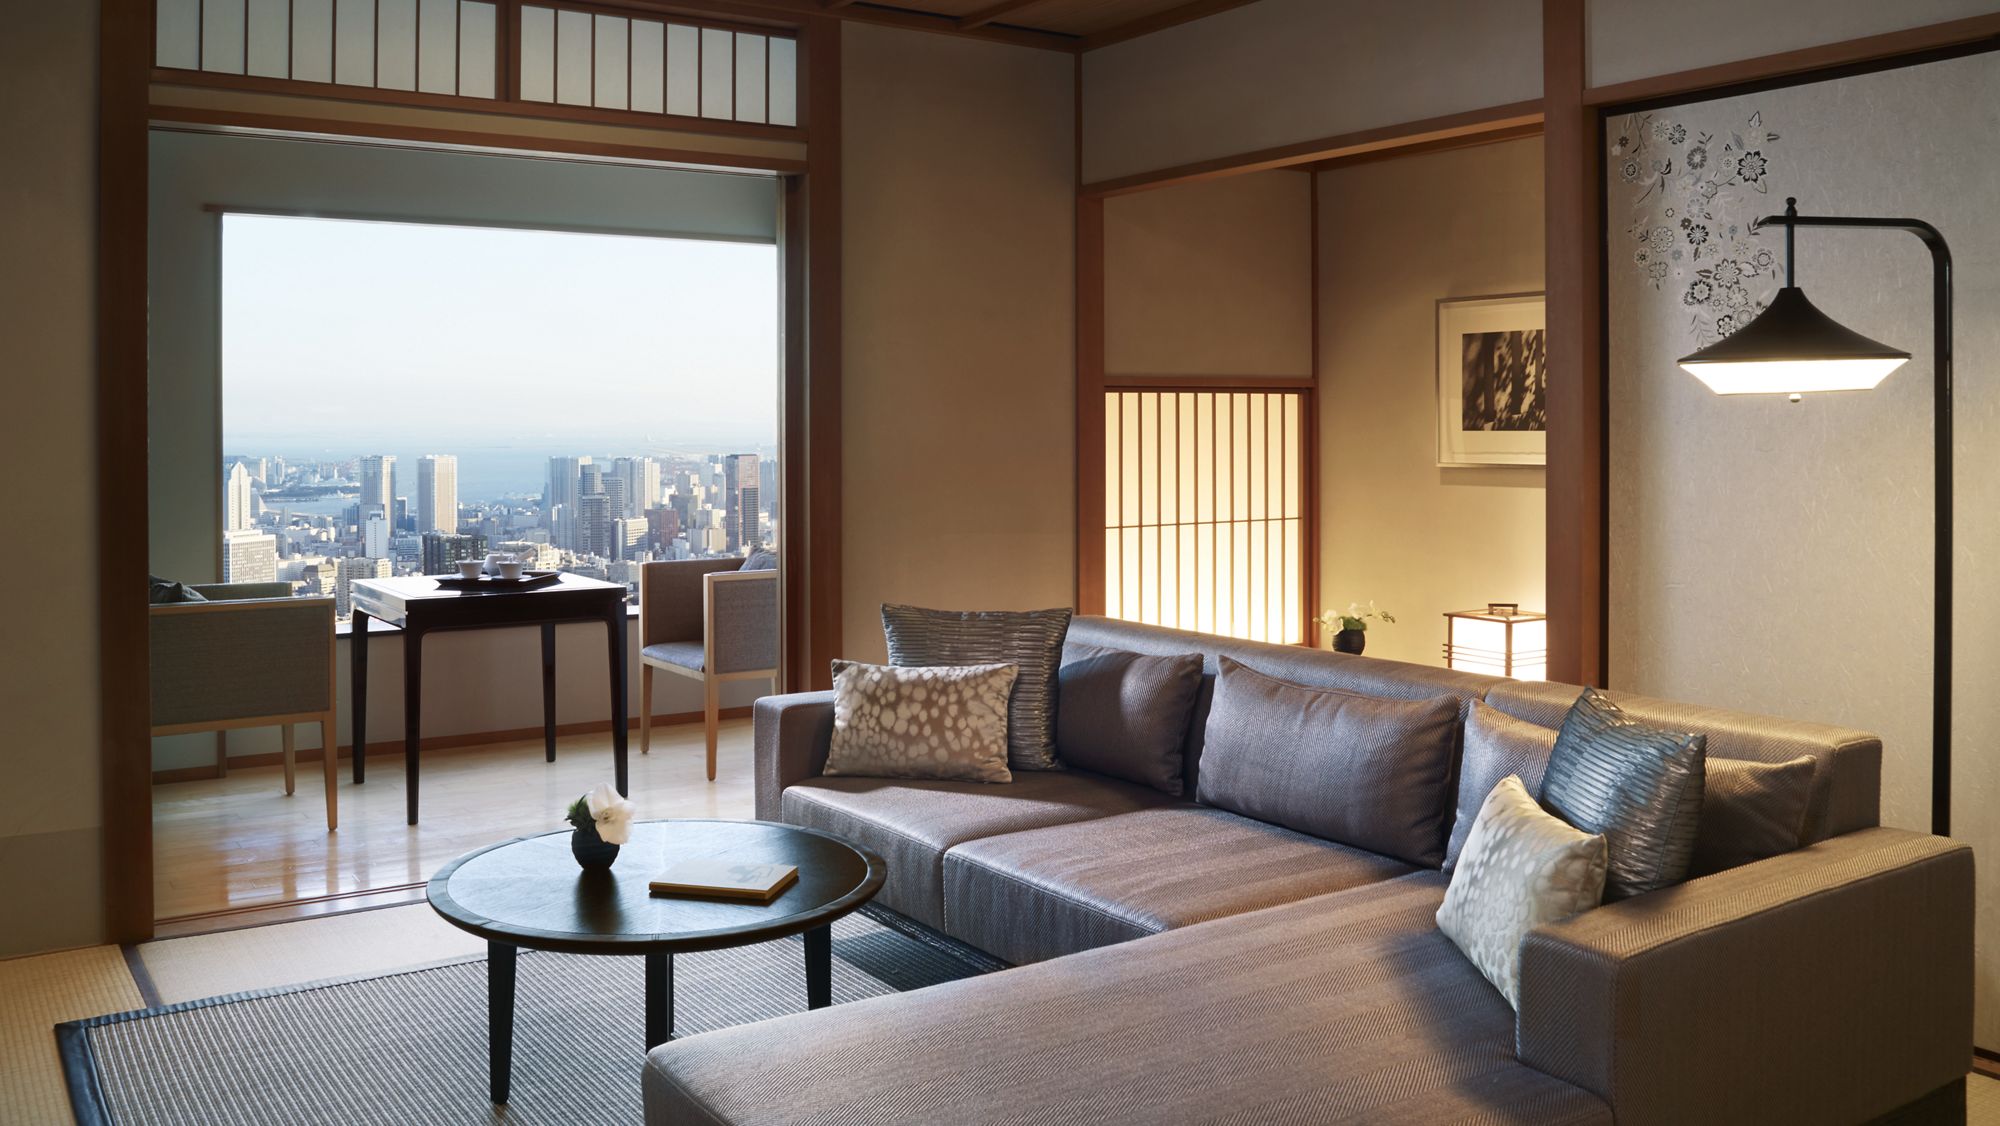 Modern living room with skyline views and features like a sleek, sectional sofa and Japanese-style walls